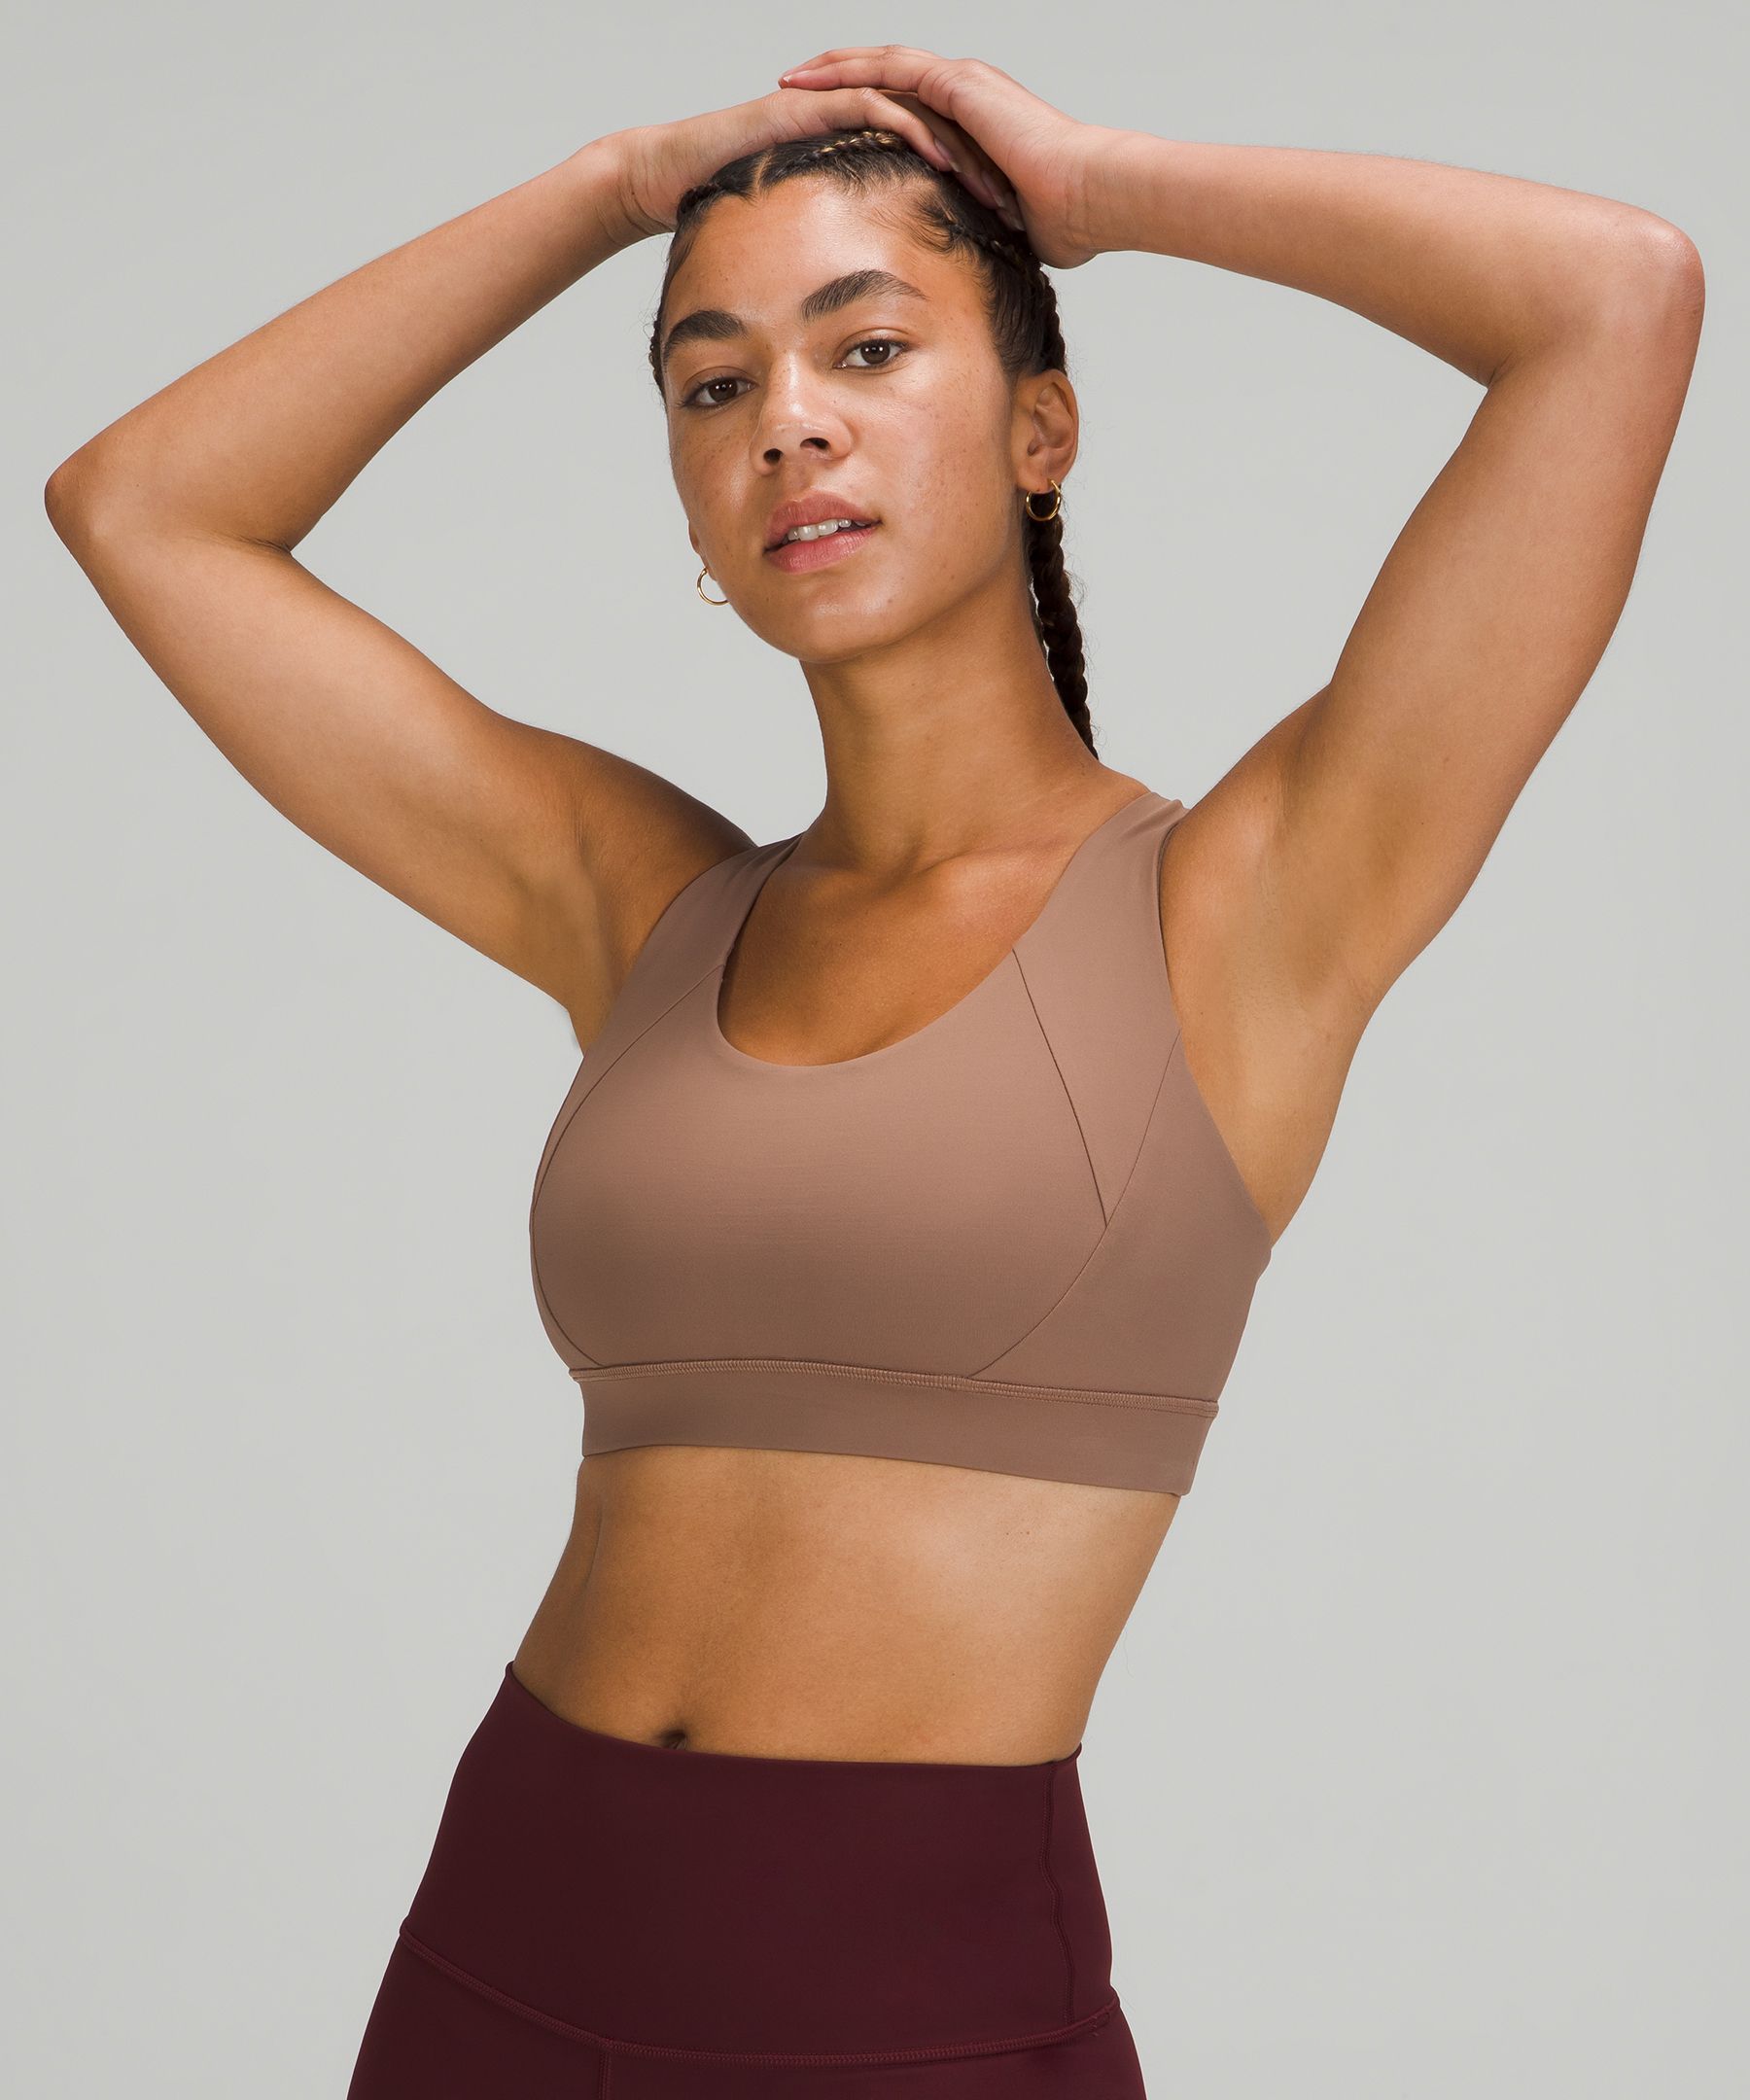 All in Motion Women's Sports Bras from $11 on Target.com